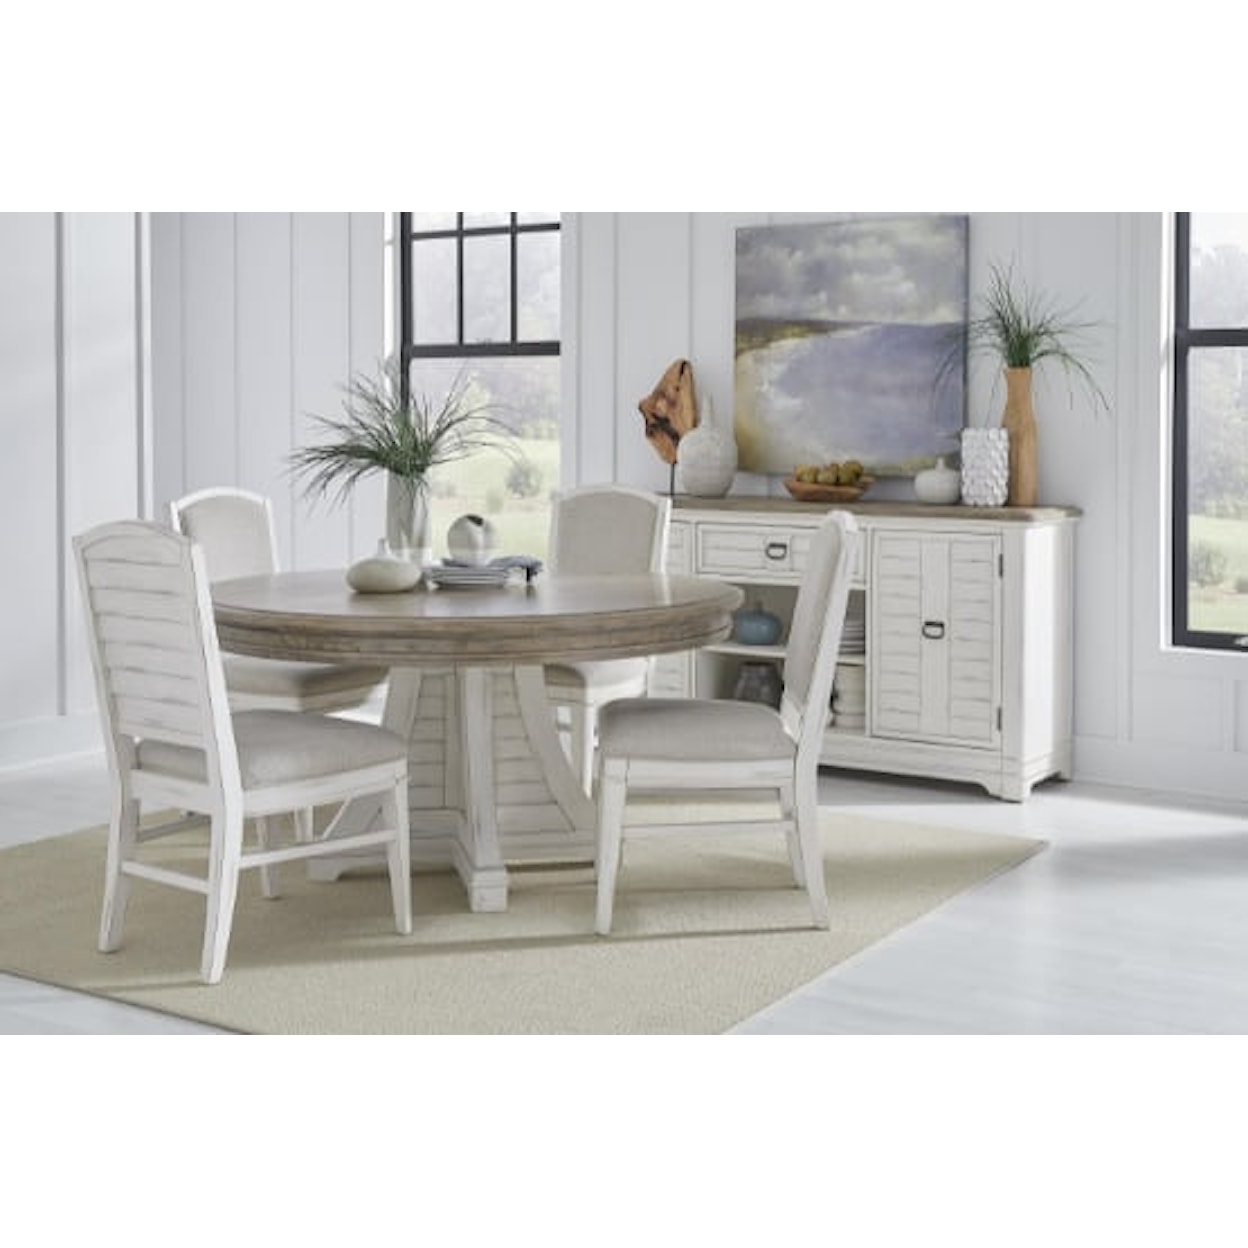 American Woodcrafters Meadowbrook 5-Piece Dining Set